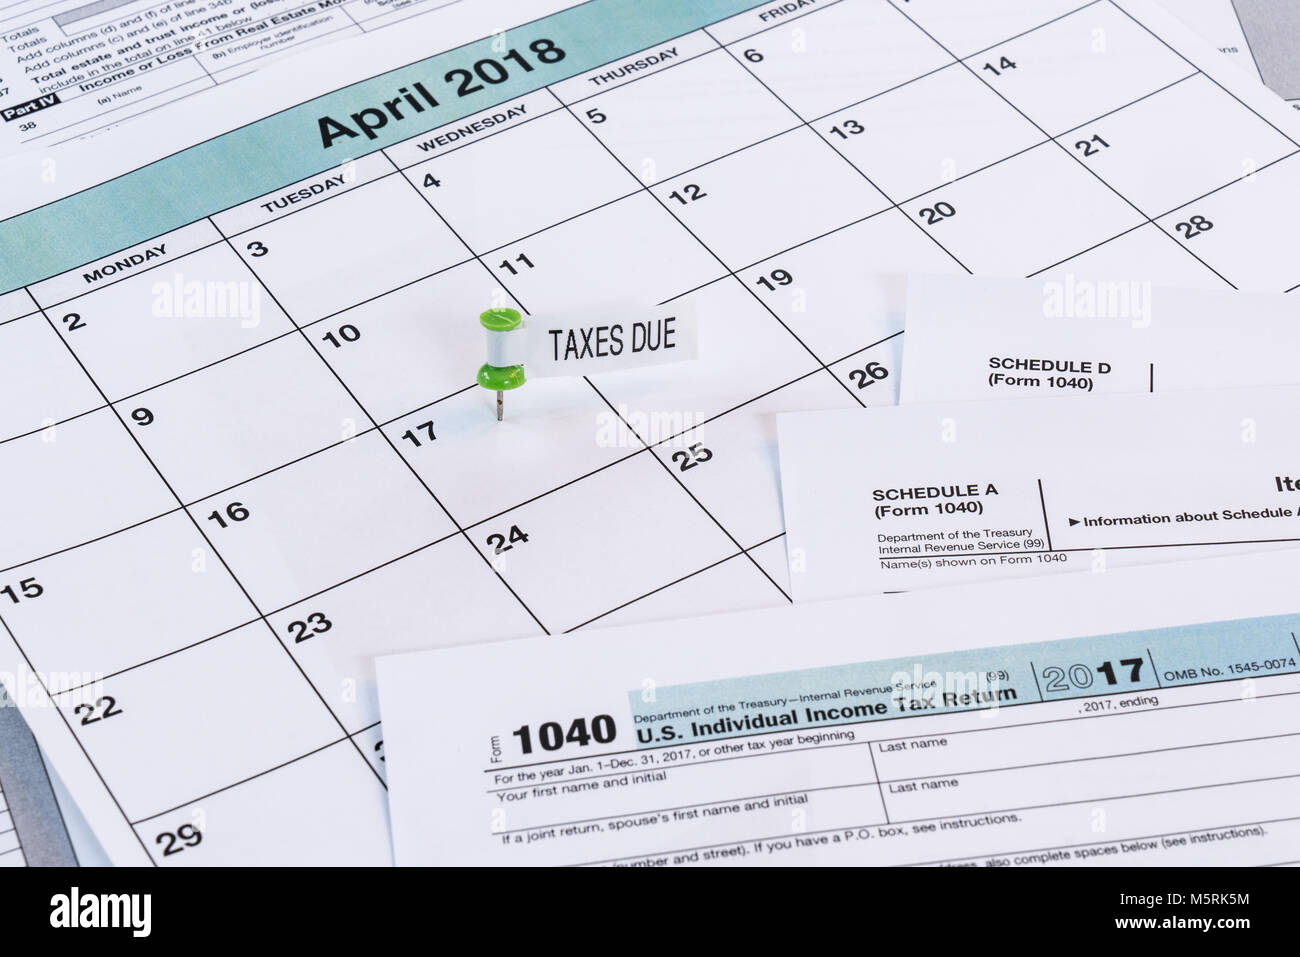 Calendar with reminder for taxes due on April 17th Stock Photo